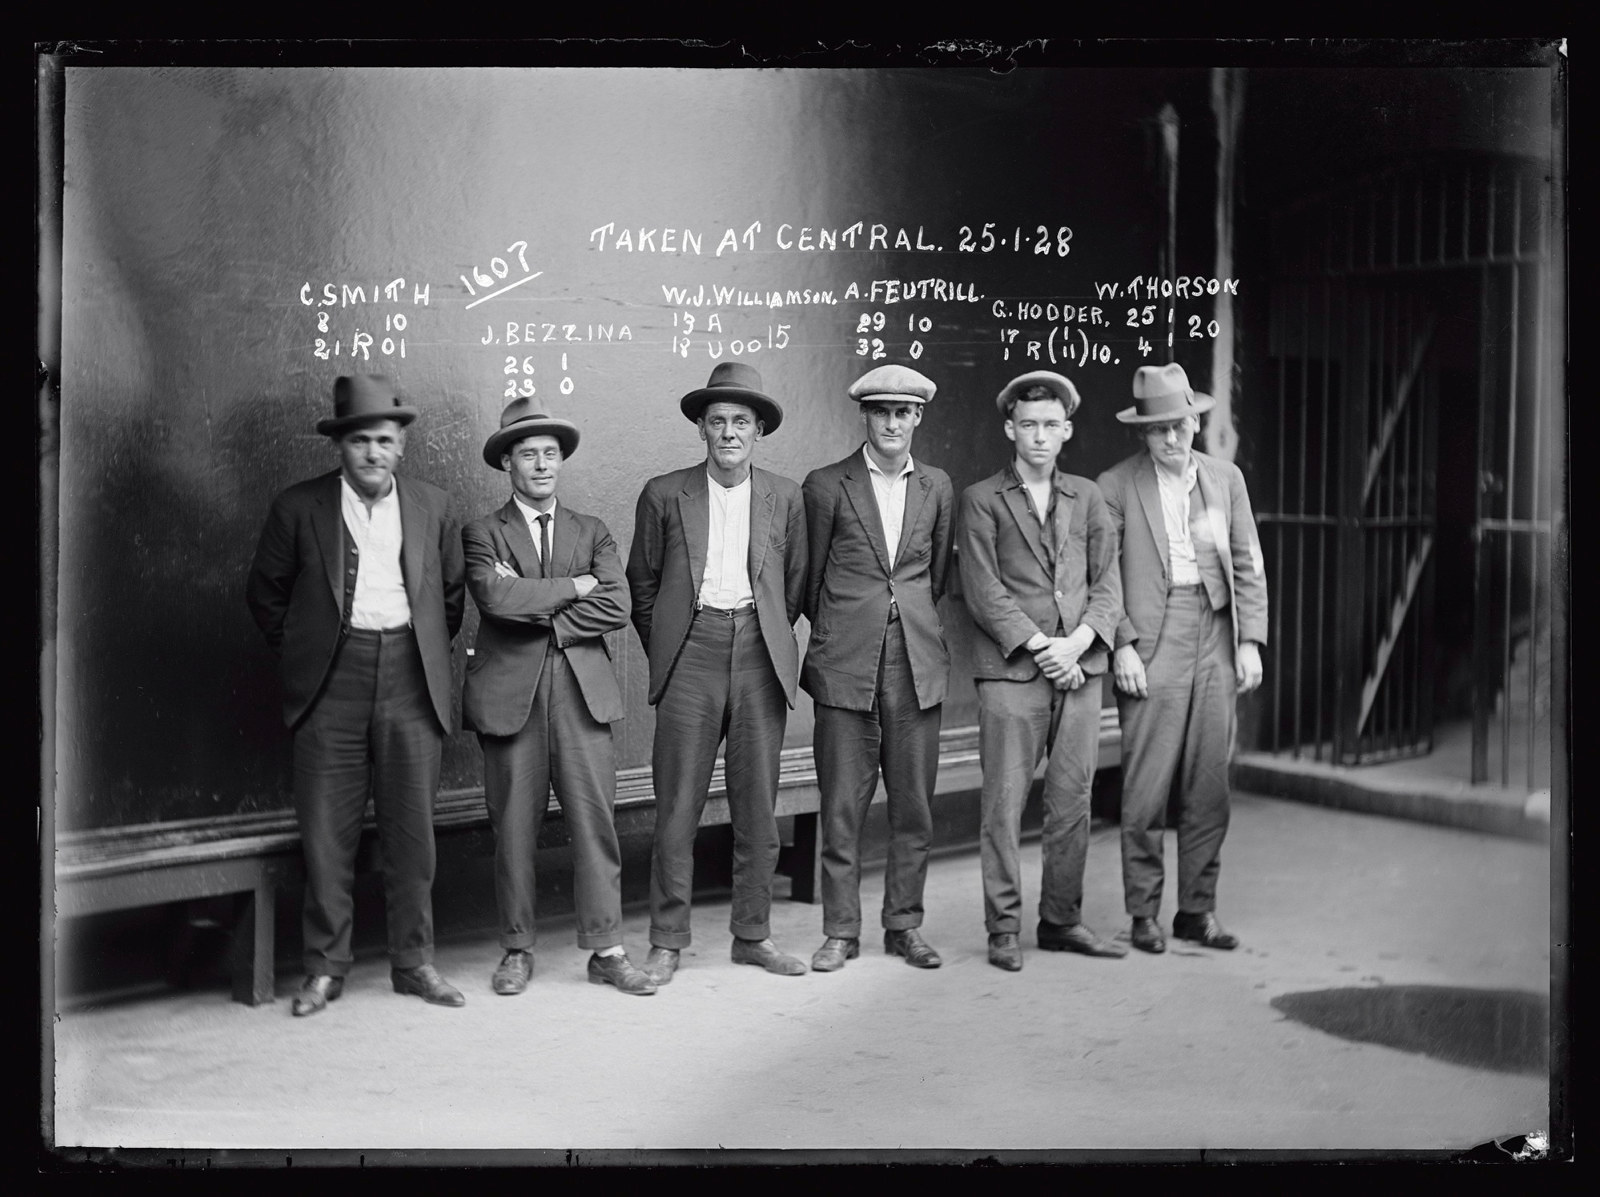 C Smith, J Bezzina, W J Williamson, A Feutrill, G Hodder and W Thorson, Special Photograph number 1607, 25 January 1928, Central Police Station, Sydney